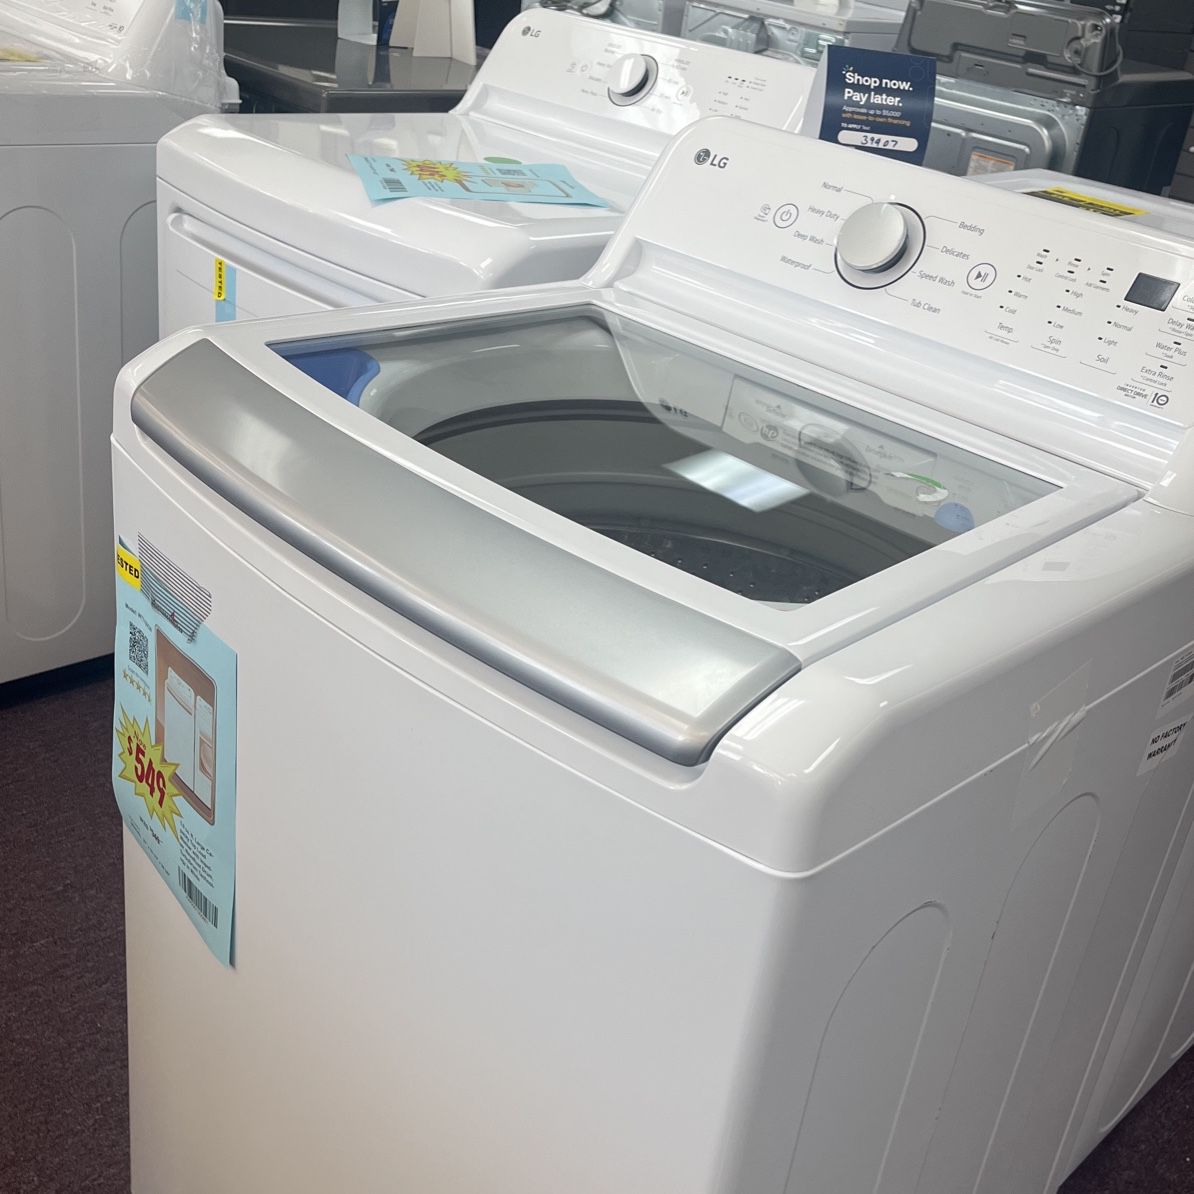 Set Washer And Dryer $949 And No Taxes! Final Price 